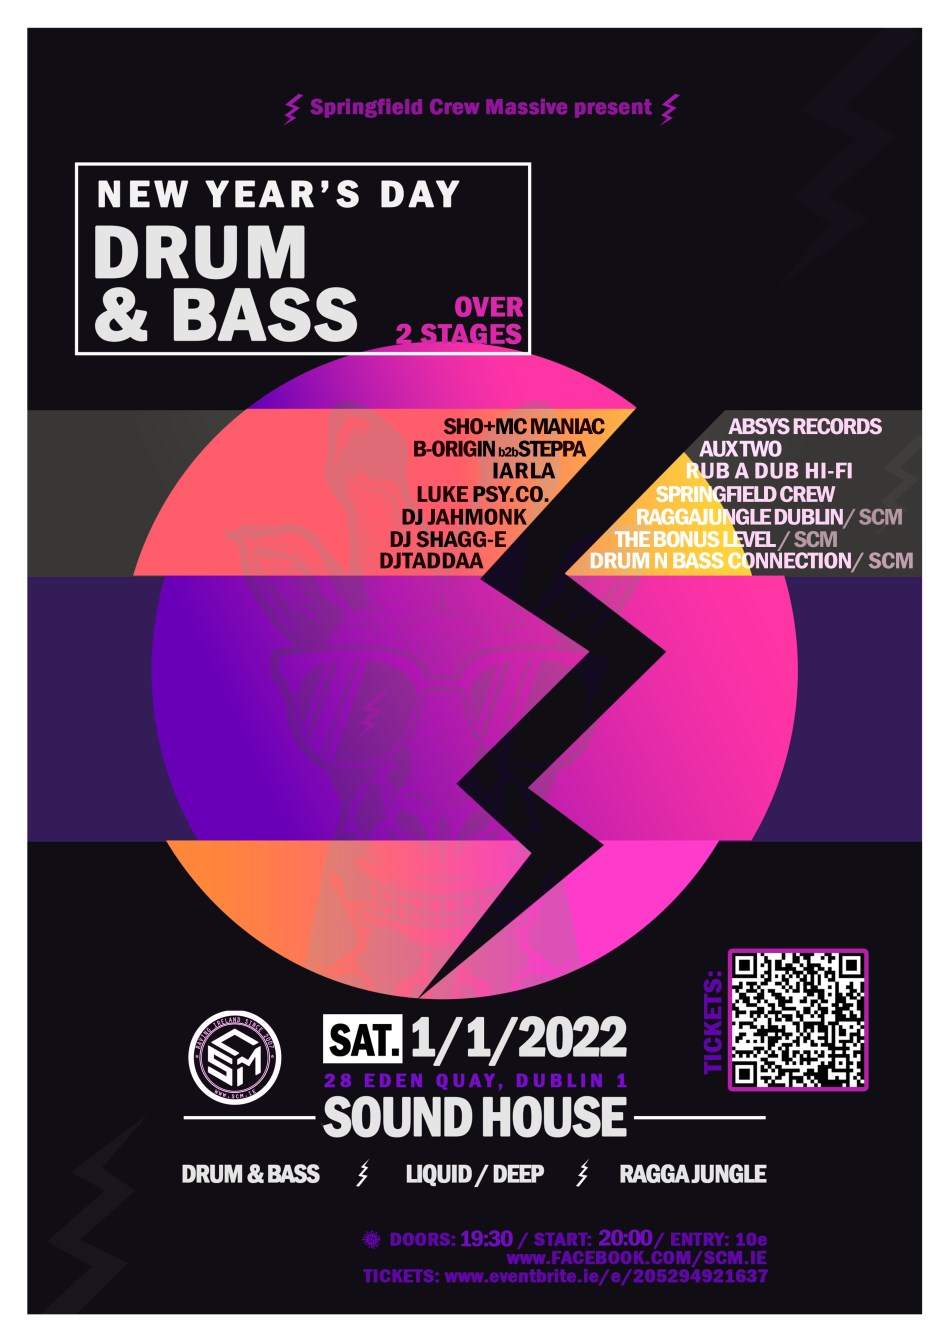 New Years Day Drum and Bass ( at The Sound House ) Still ON w 50% Capacity - Página trasera